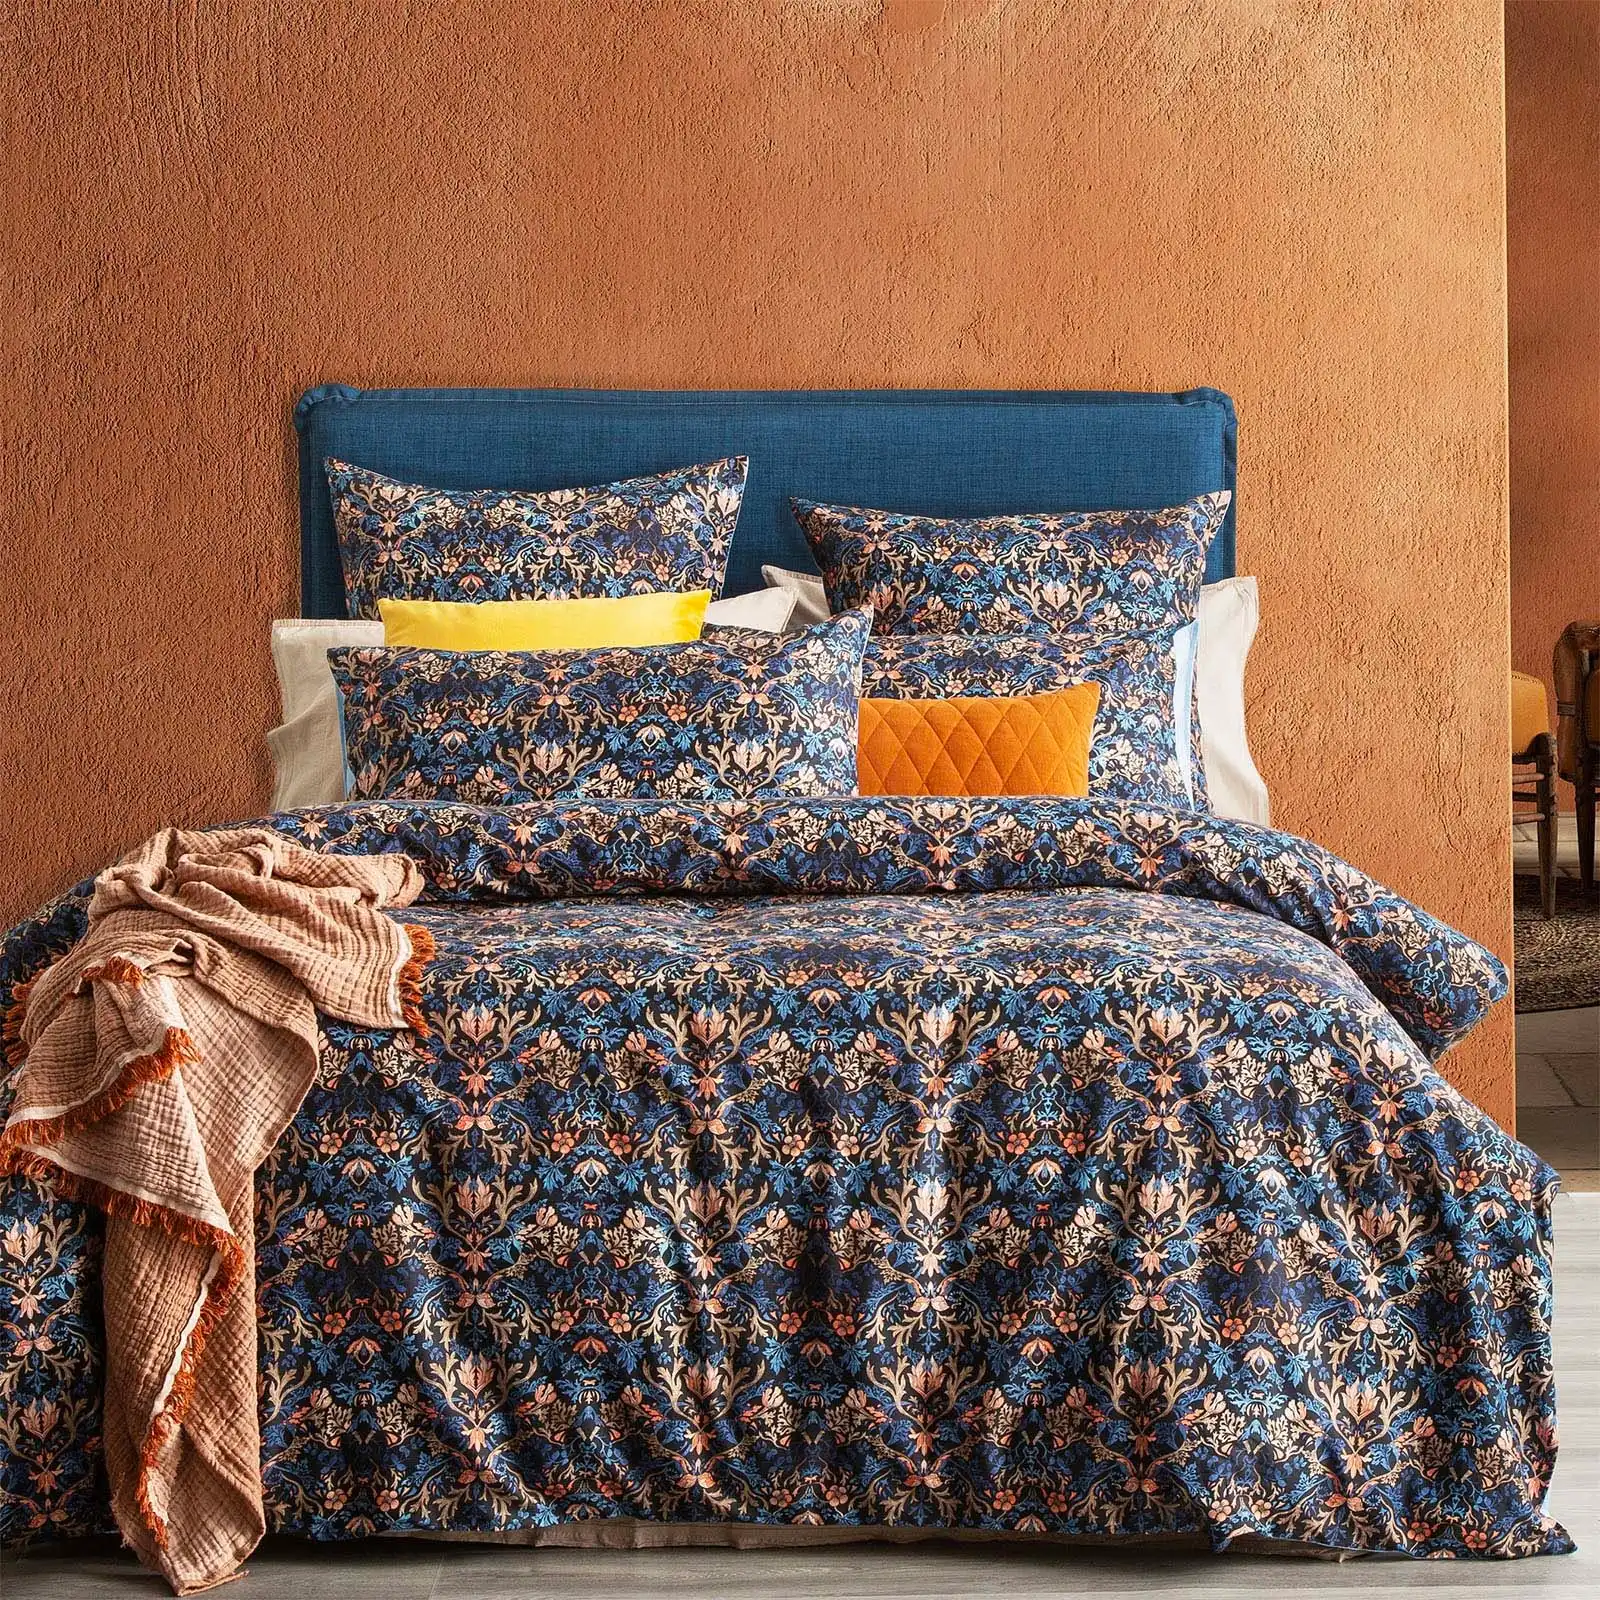 Blackthorn Quilt cover set 300 Thread Count Cotton Reversible